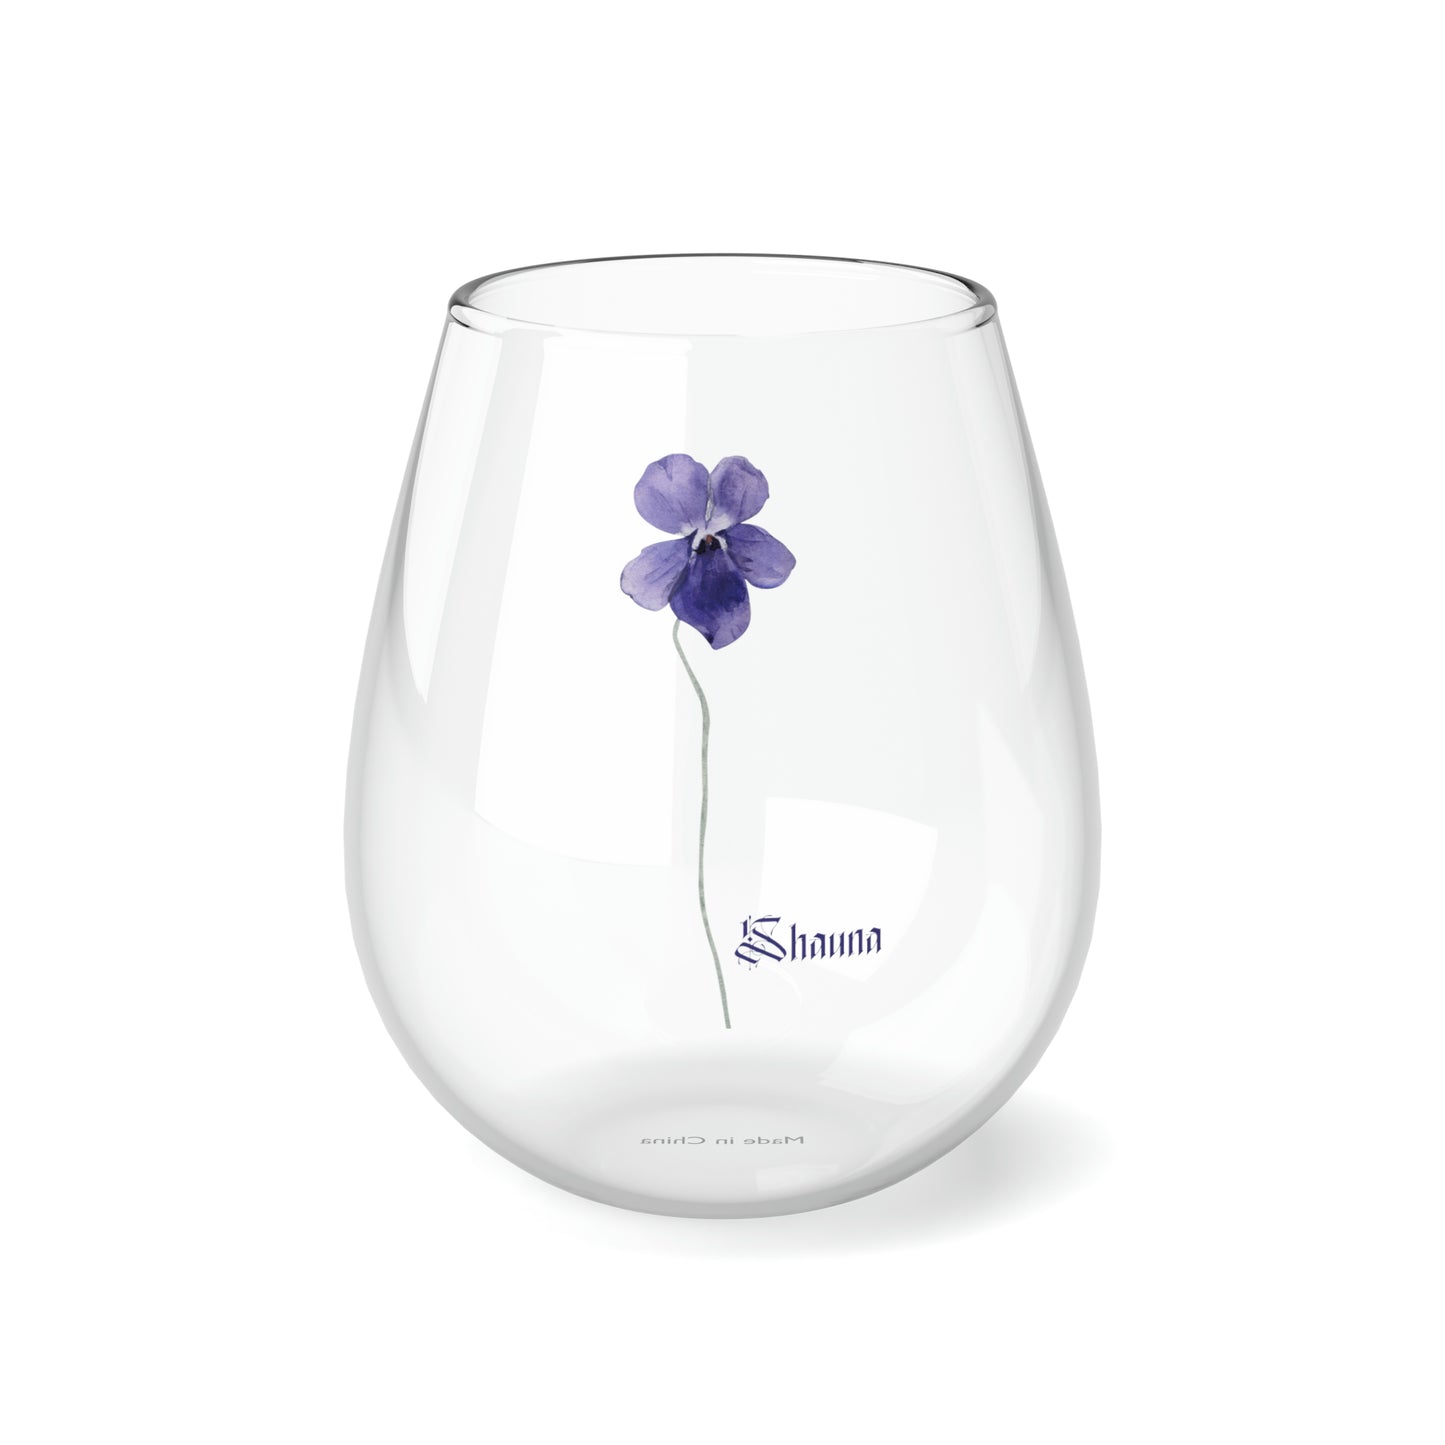 February PERSONALIZED Birth Flower Wine Glass, Birth Flower Gifts, Birth Flower wine glass, Birth Flower Gifts for Women, Gift for coworker, sister gift, birthday gift, Valentine gift, Stemless Wine Glass, 11.75oz